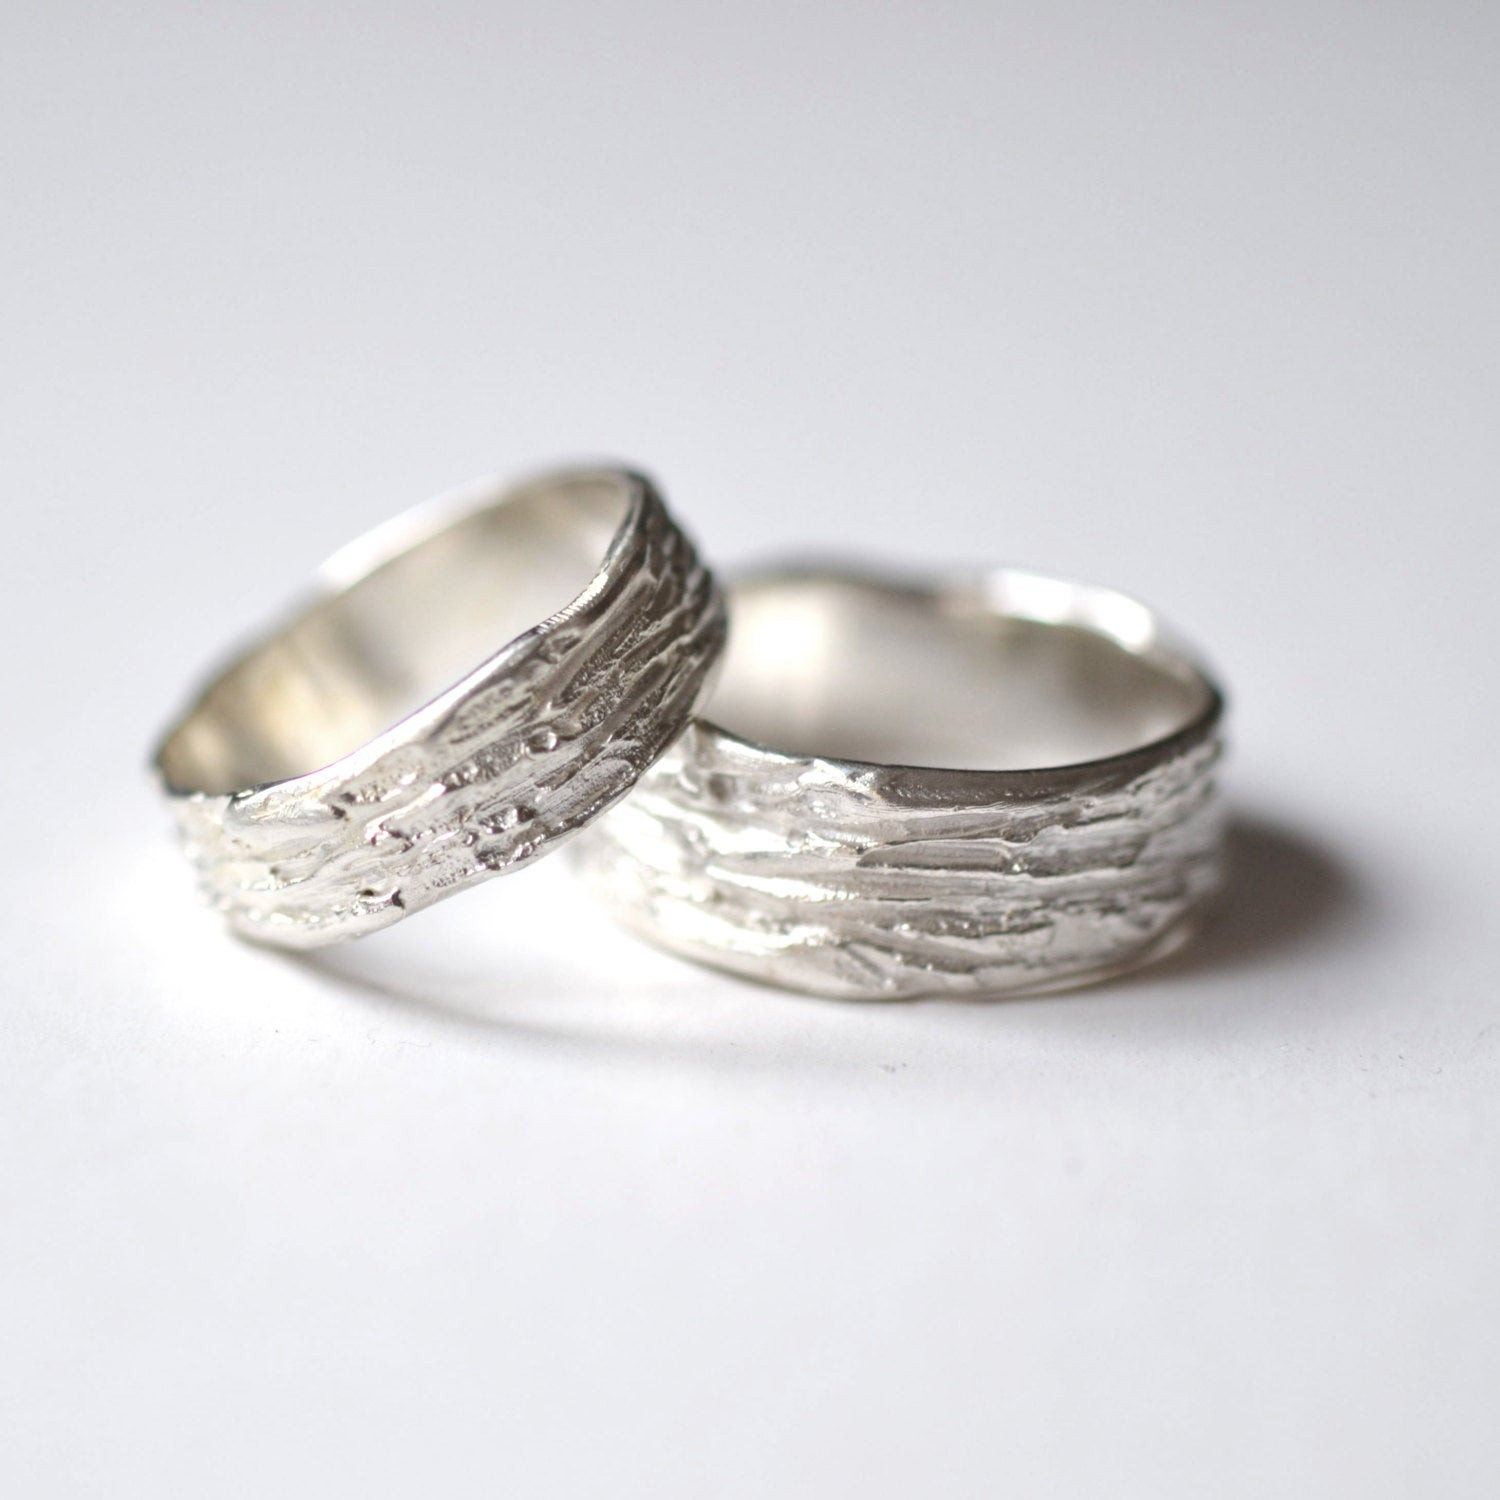 Country Wedding Rings
 Rustic Wedding rings Silver Textured wedding bands Scratched